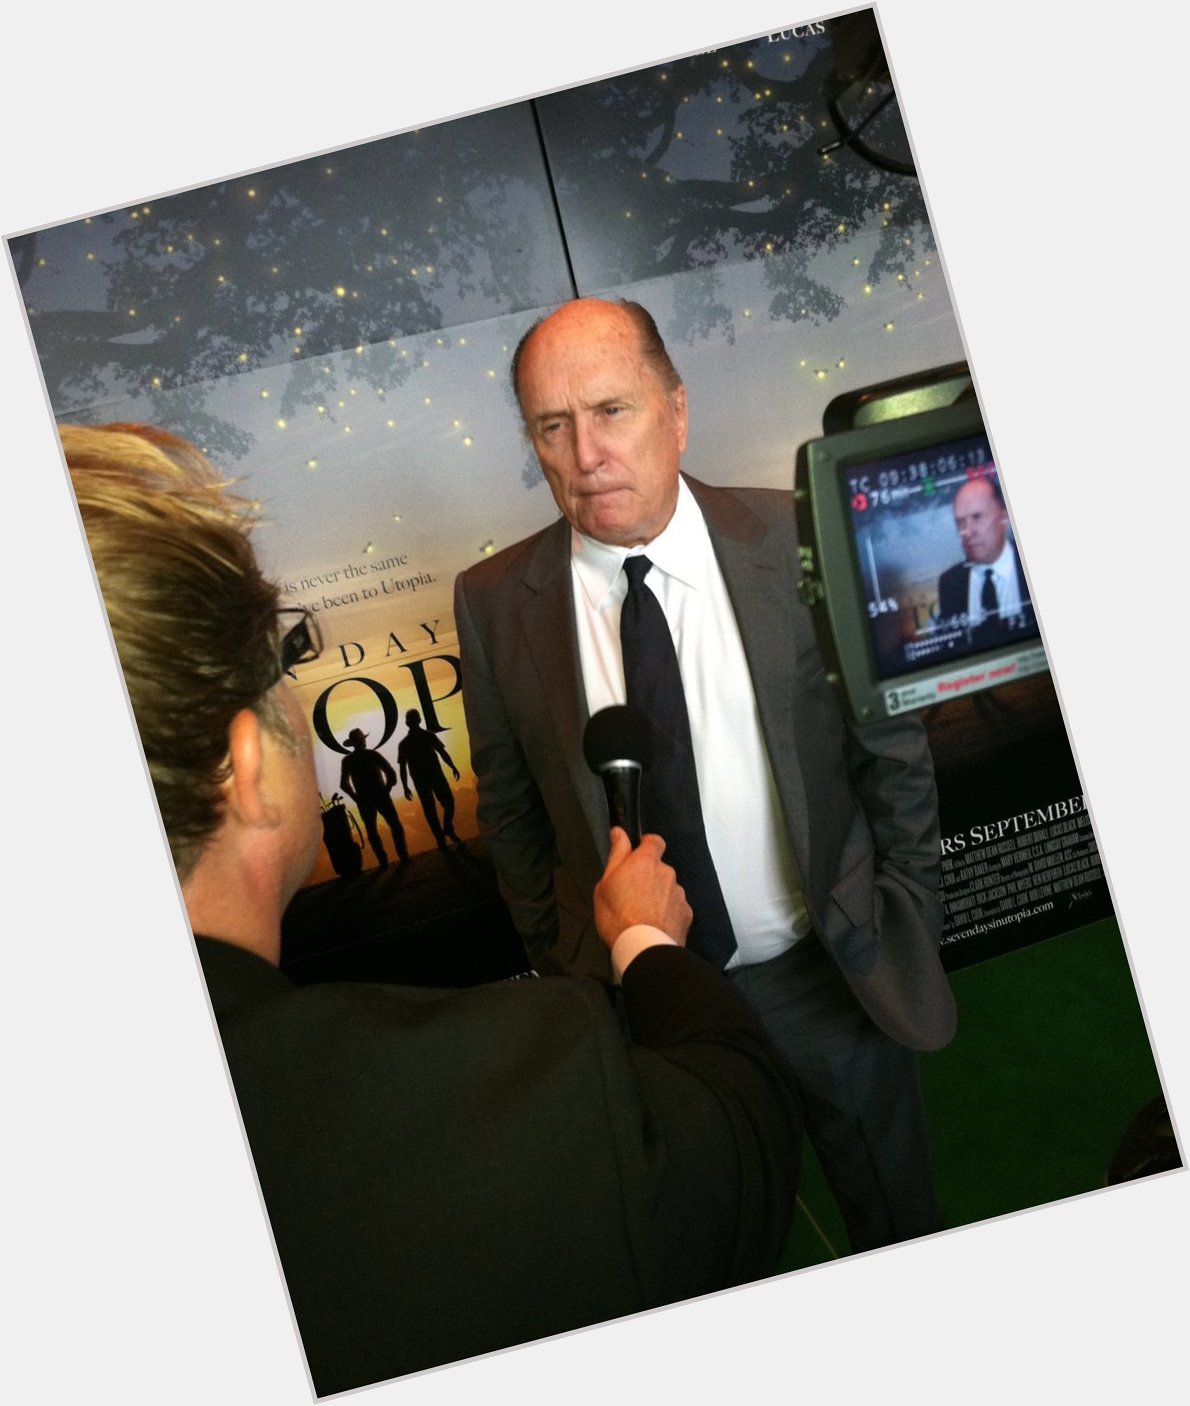 Happy birthday to Robert Duvall!  Honored to have met him on a red carpet years ago. 